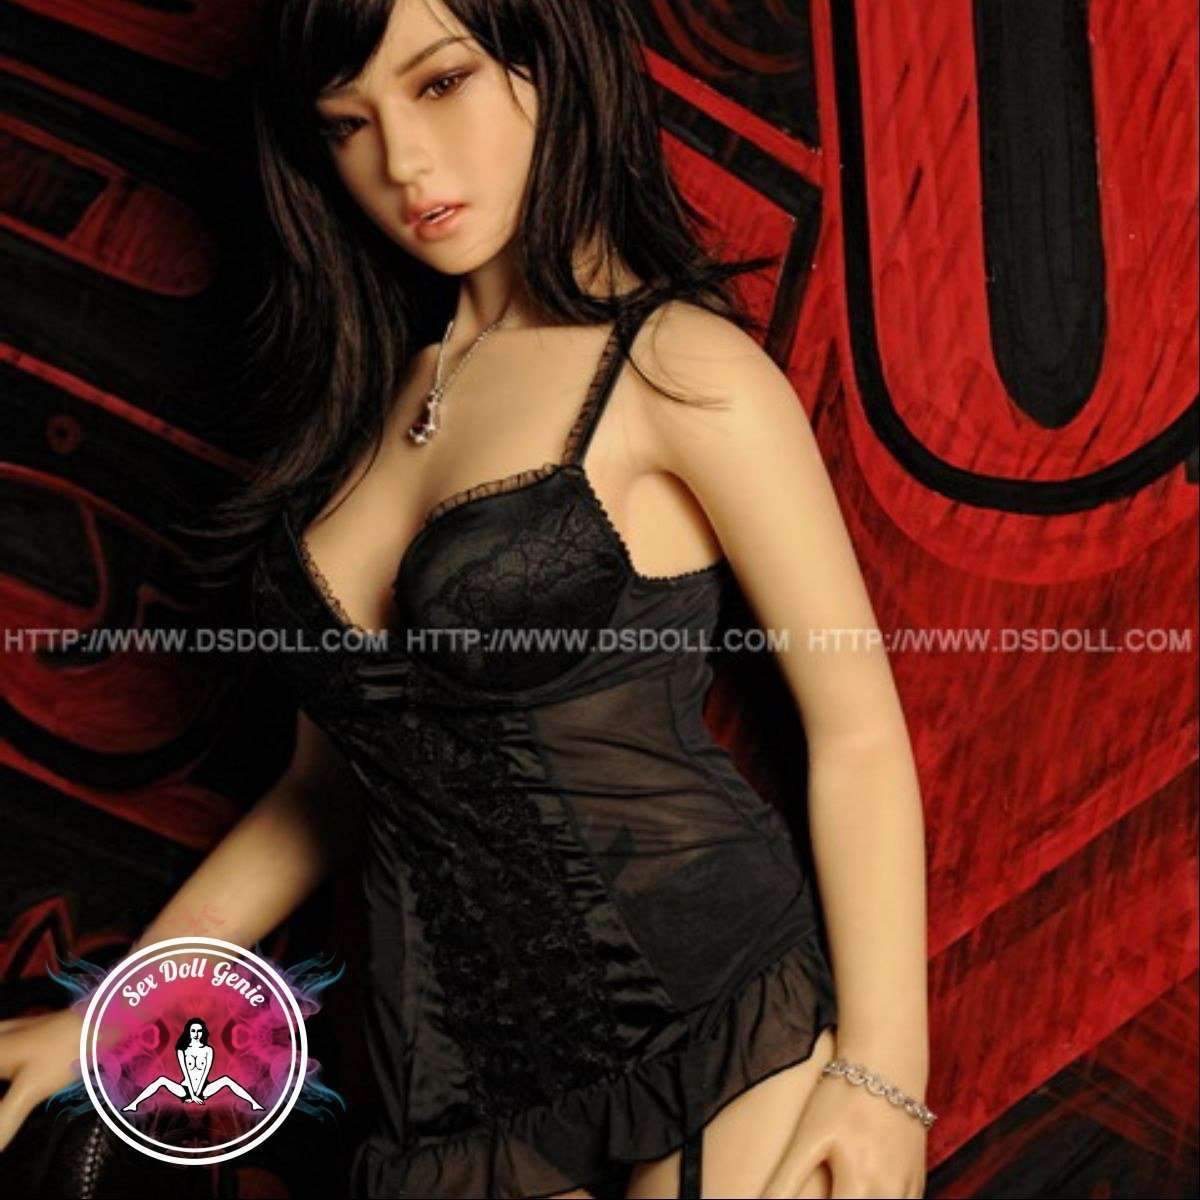 DS Doll - 160cm - Kayla Head - Type 1 D Cup Silicone Doll-4